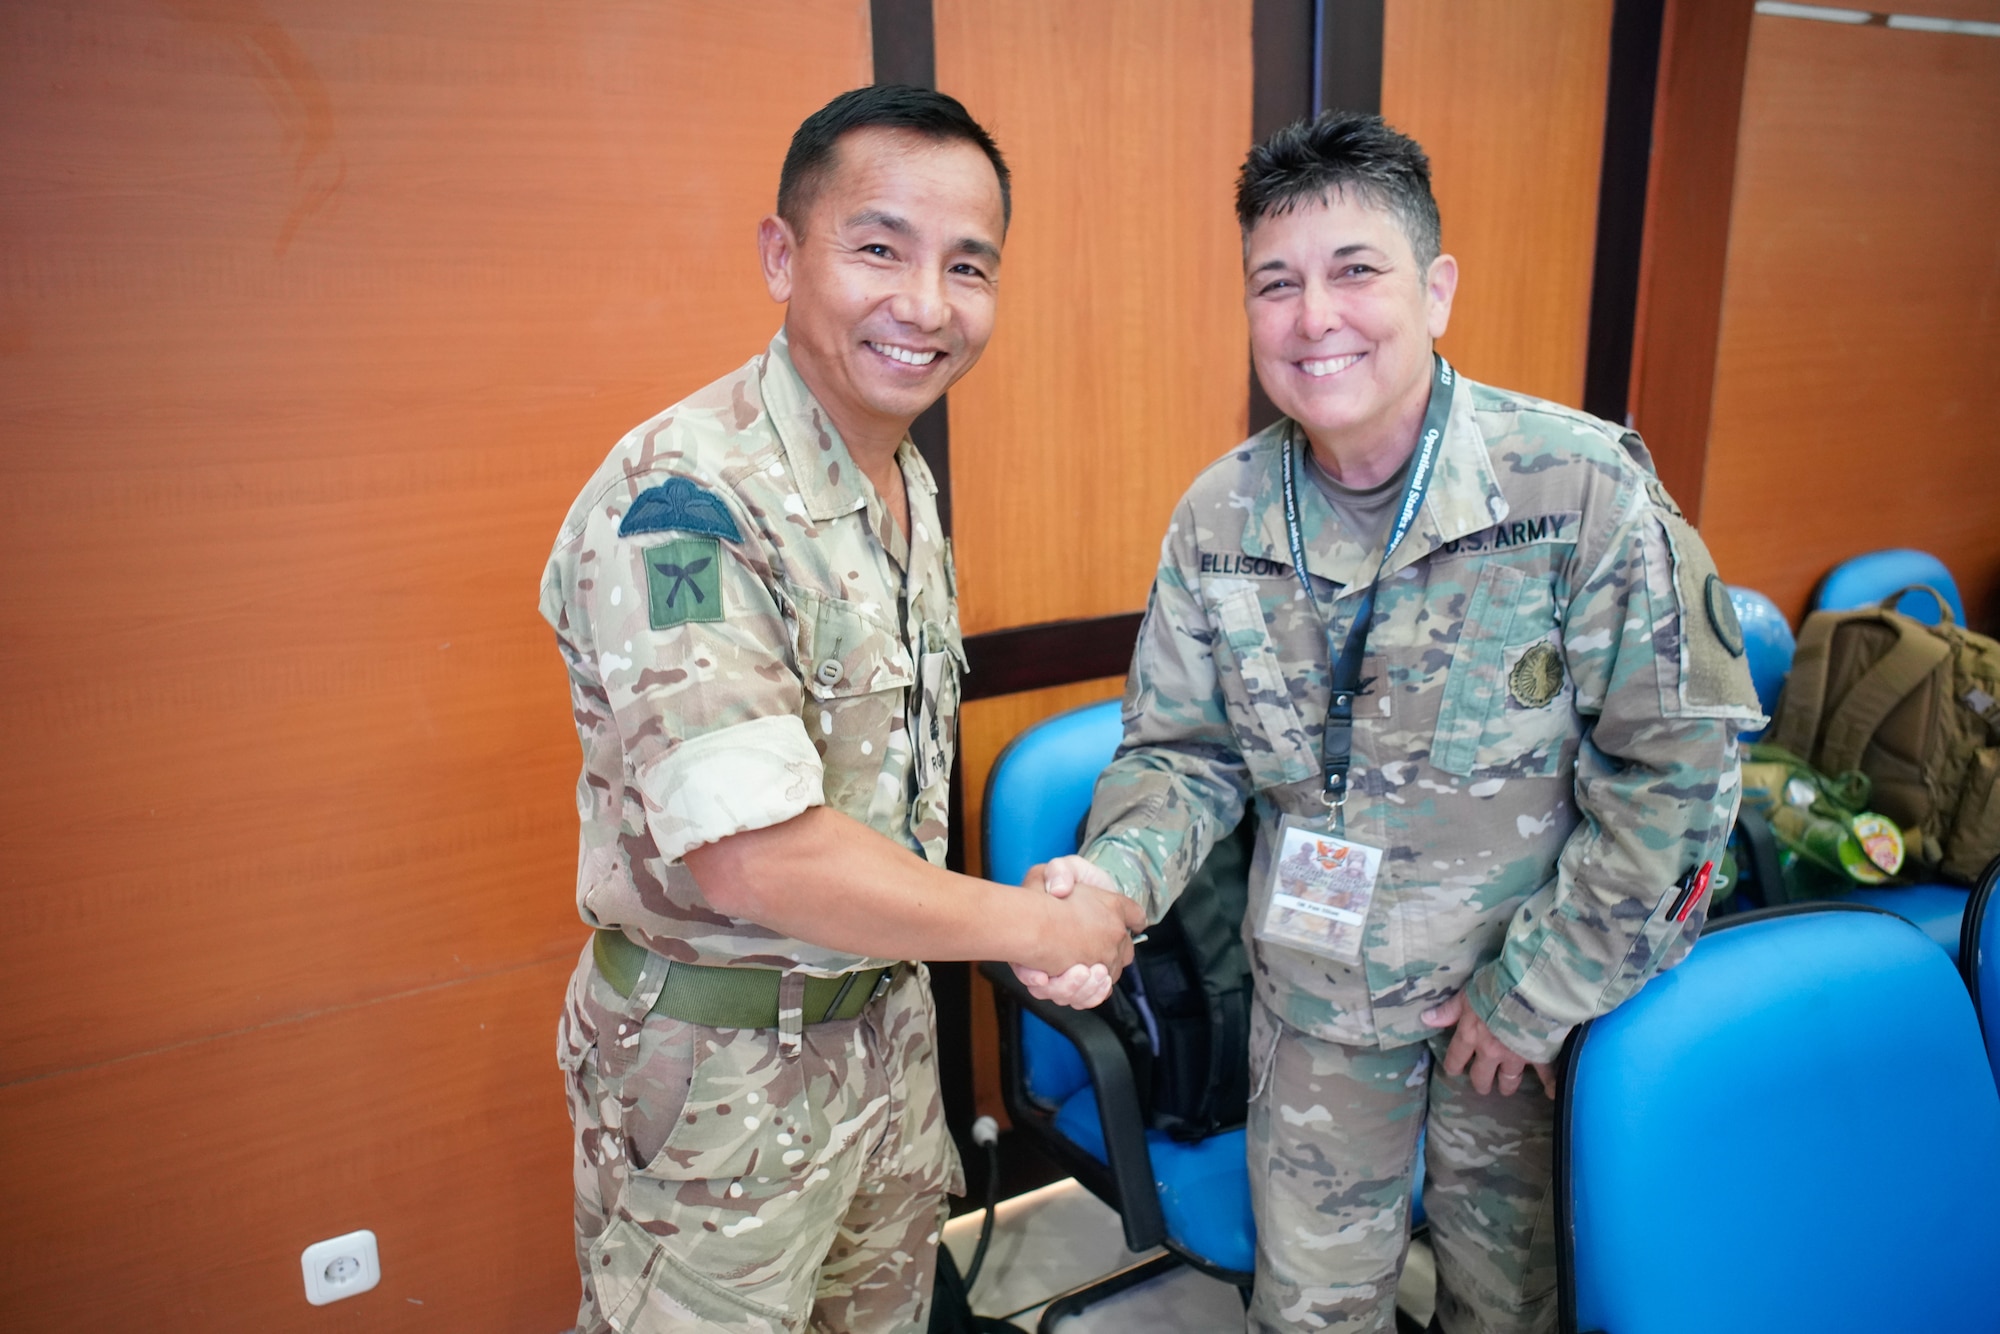 Maj Som Thulung, United Kingdom Armed Forces delegation, and Col. Pam Ellison, Hawaii Army National Guard, U.S. Armed Forces delegation, greet each other before the opening ceremony of the staff exercise portion of Super Garuda Shield 2023 on Aug. 31 in Surabaya Indonesia. The annual exercise has grown in scope and size since 2009.